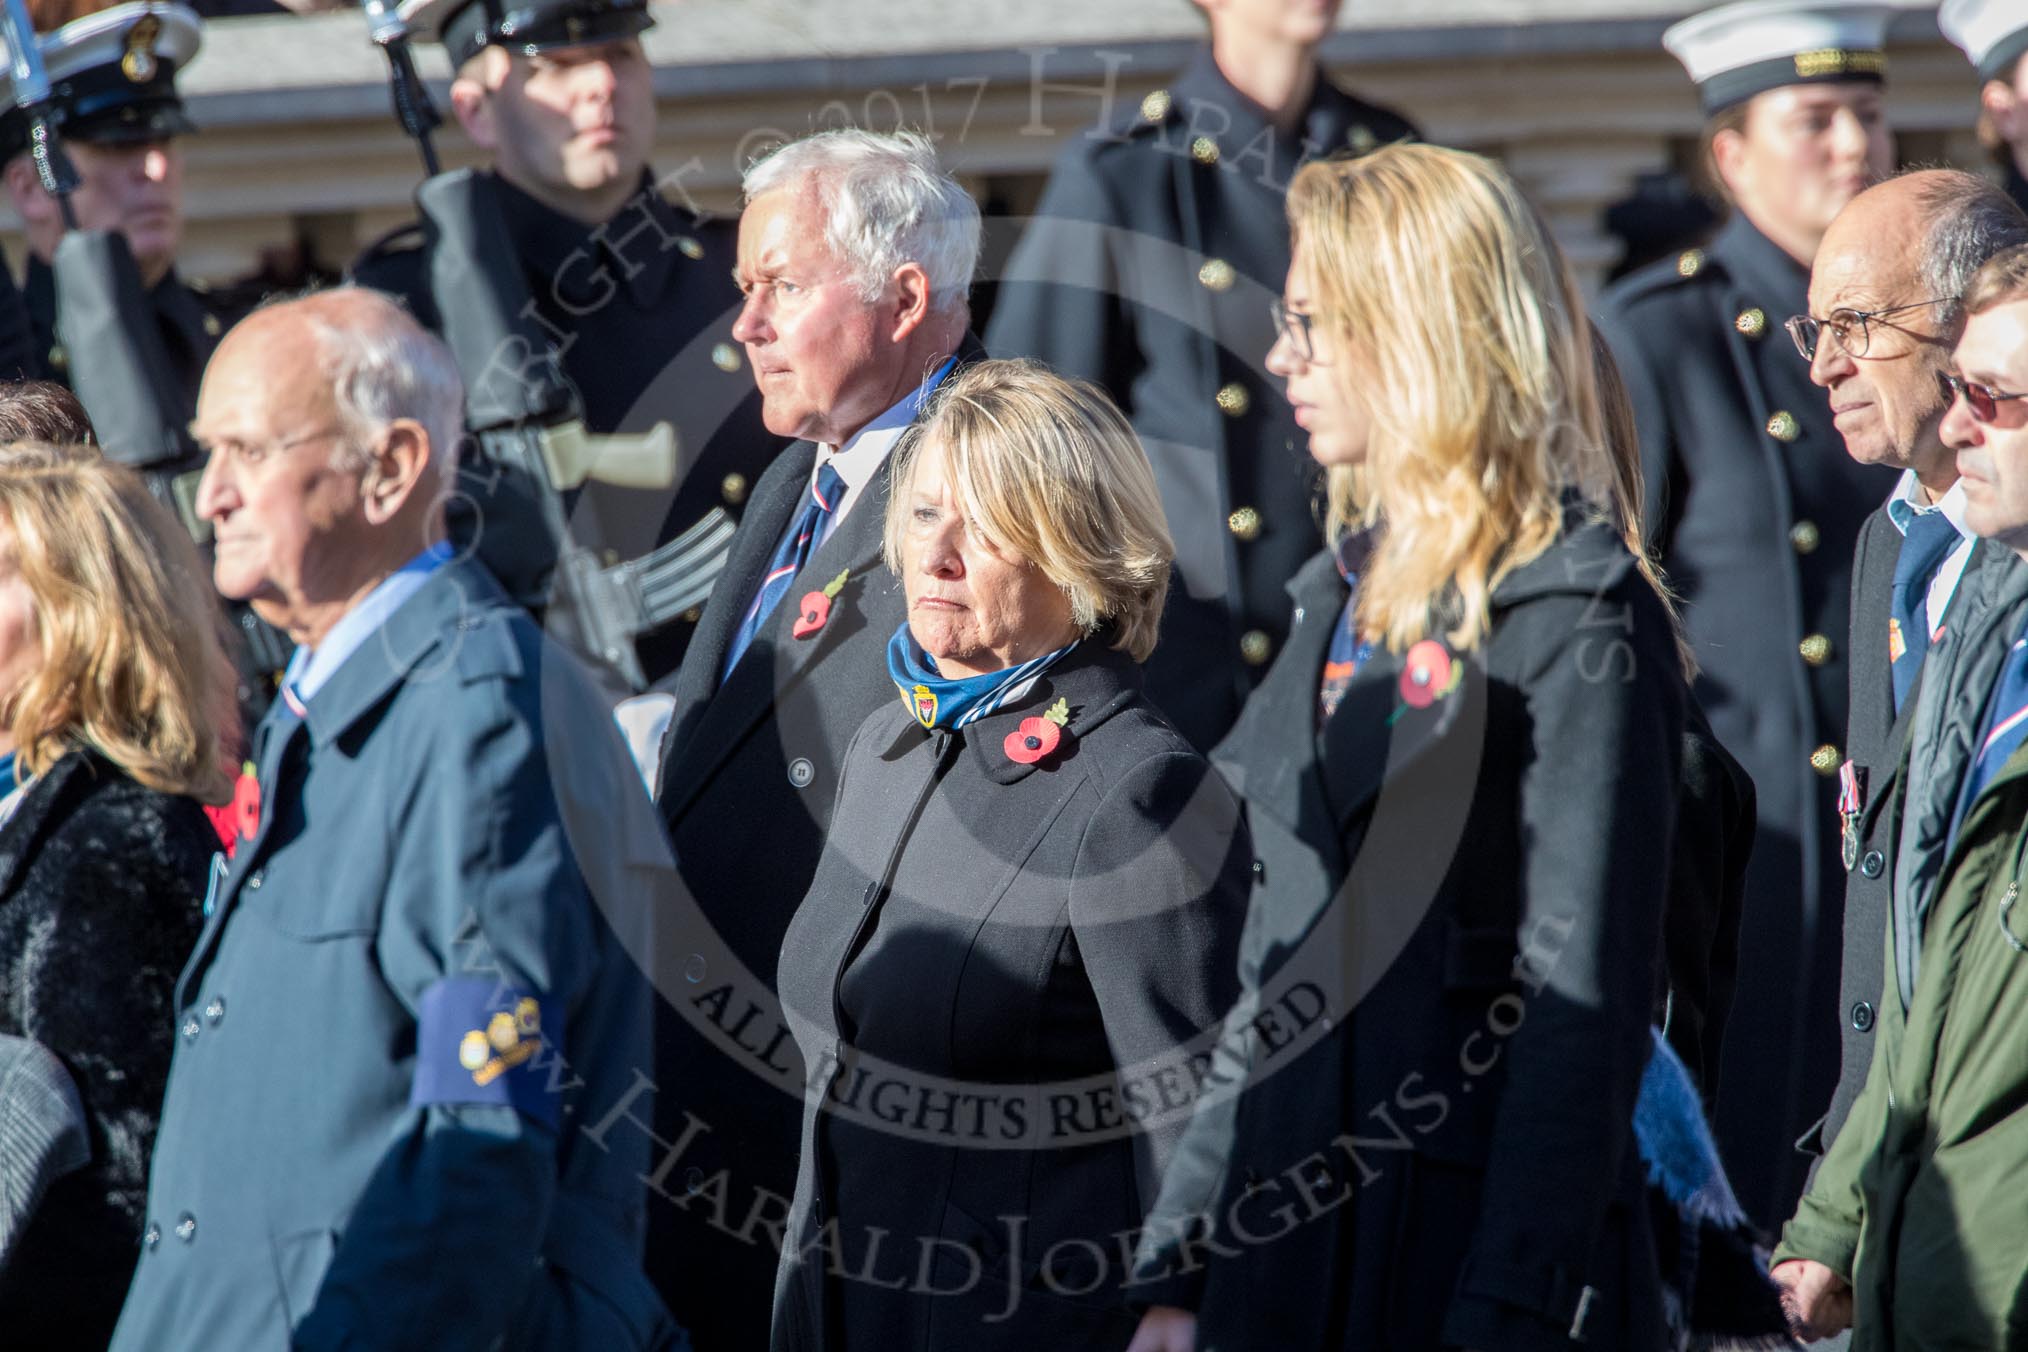 HMS Glorious, Ardent & Acasta Association  (GLARAC) Association (Group E17, 27 members) during the Royal British Legion March Past on Remembrance Sunday at the Cenotaph, Whitehall, Westminster, London, 11 November 2018, 11:43.